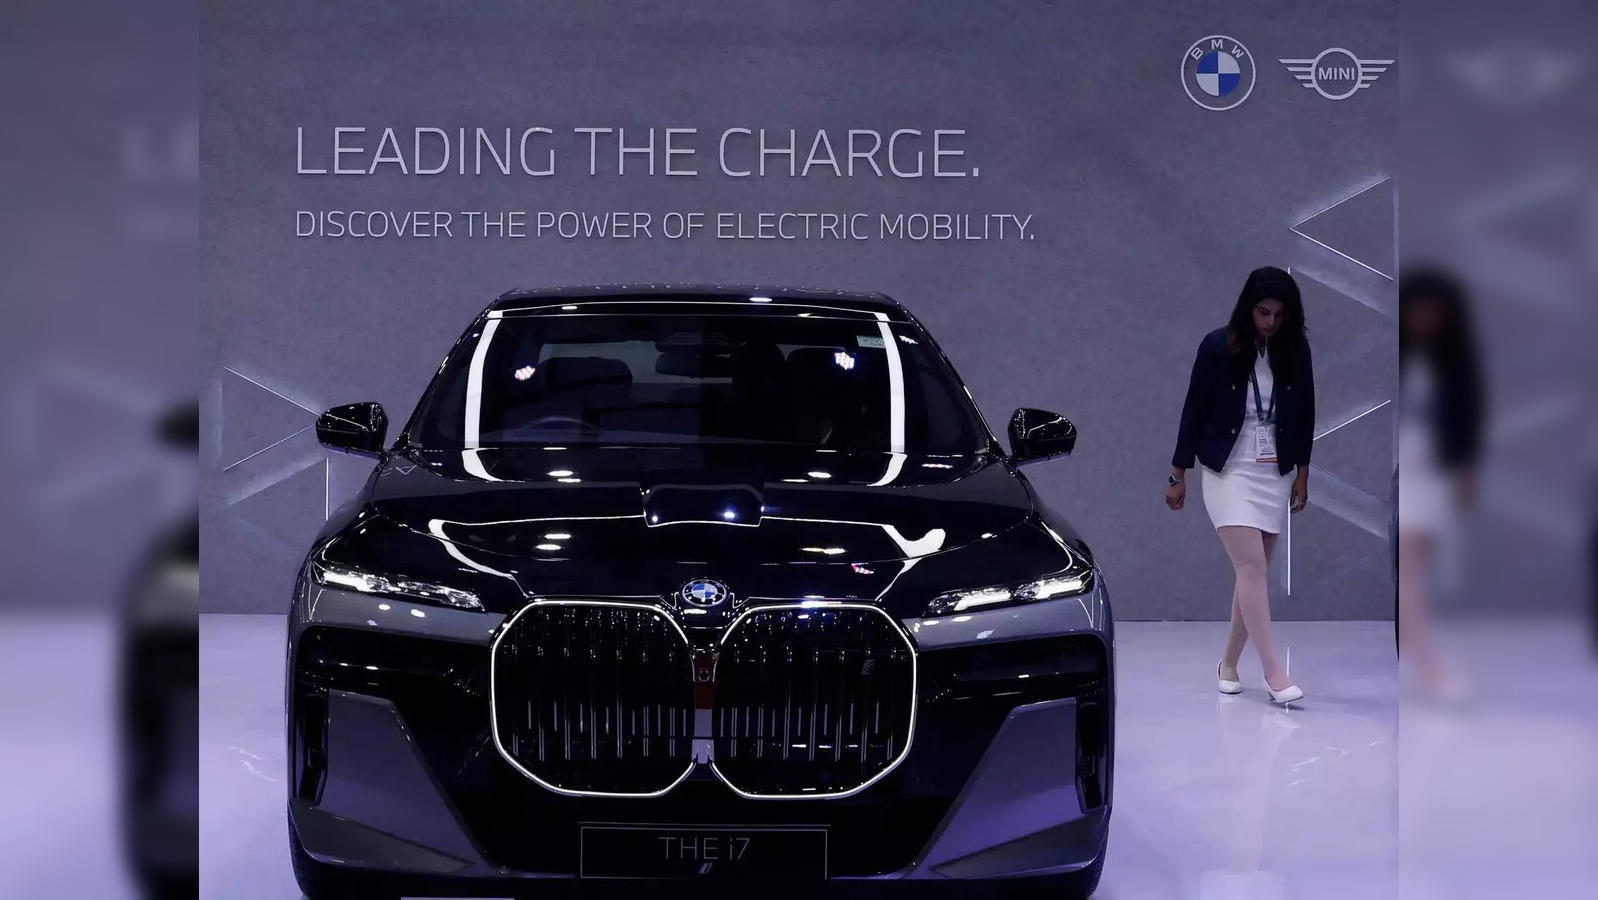 BMW targets affluent customers in India's emerging EV market - The Economic  Times